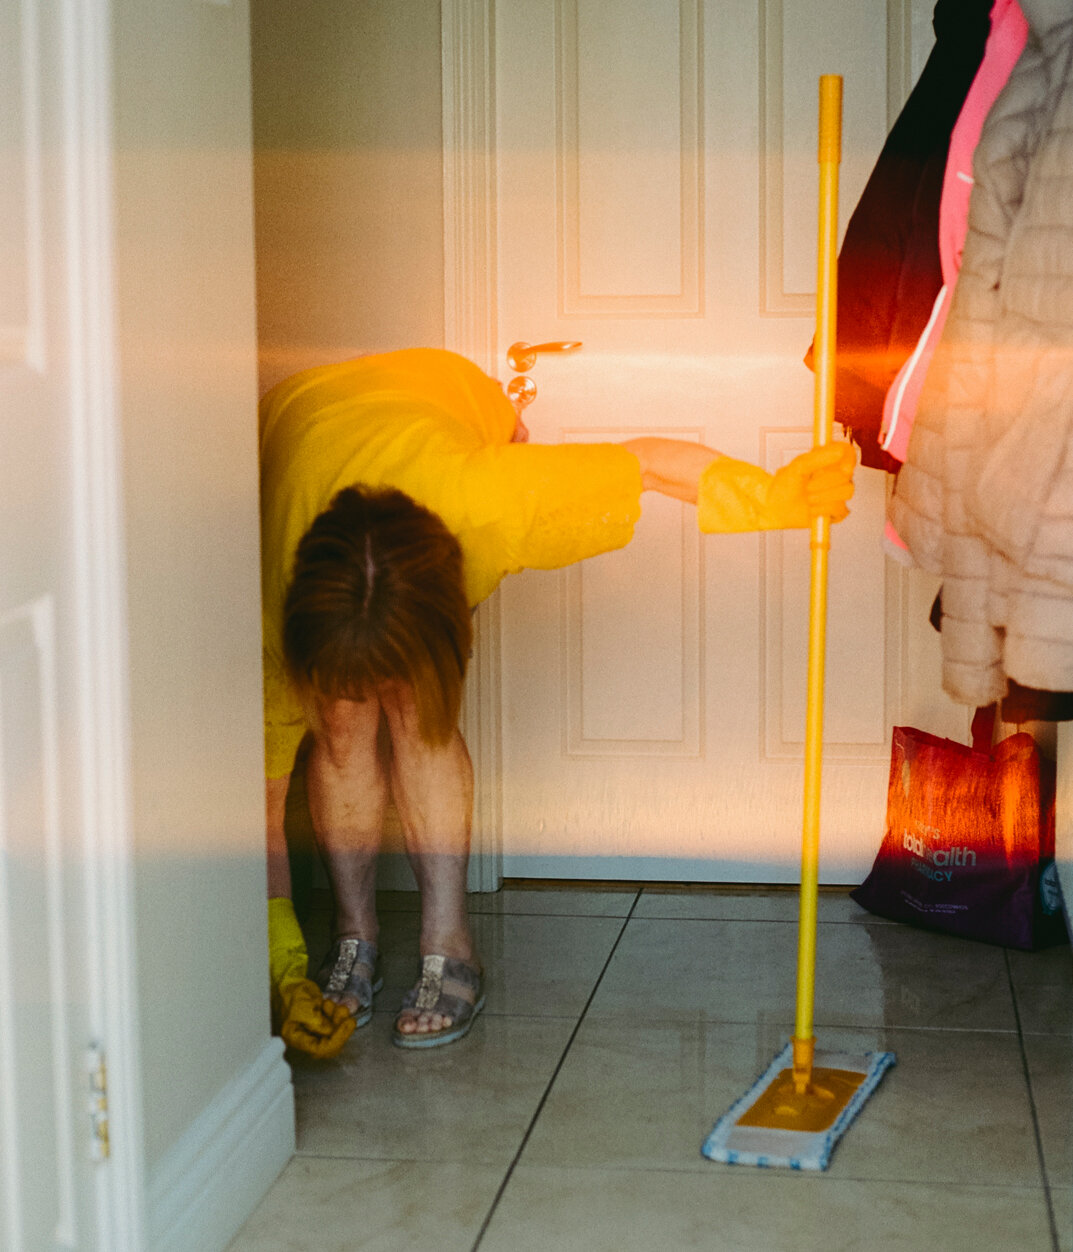 Mam mopping the floor - Home Home, 2020.